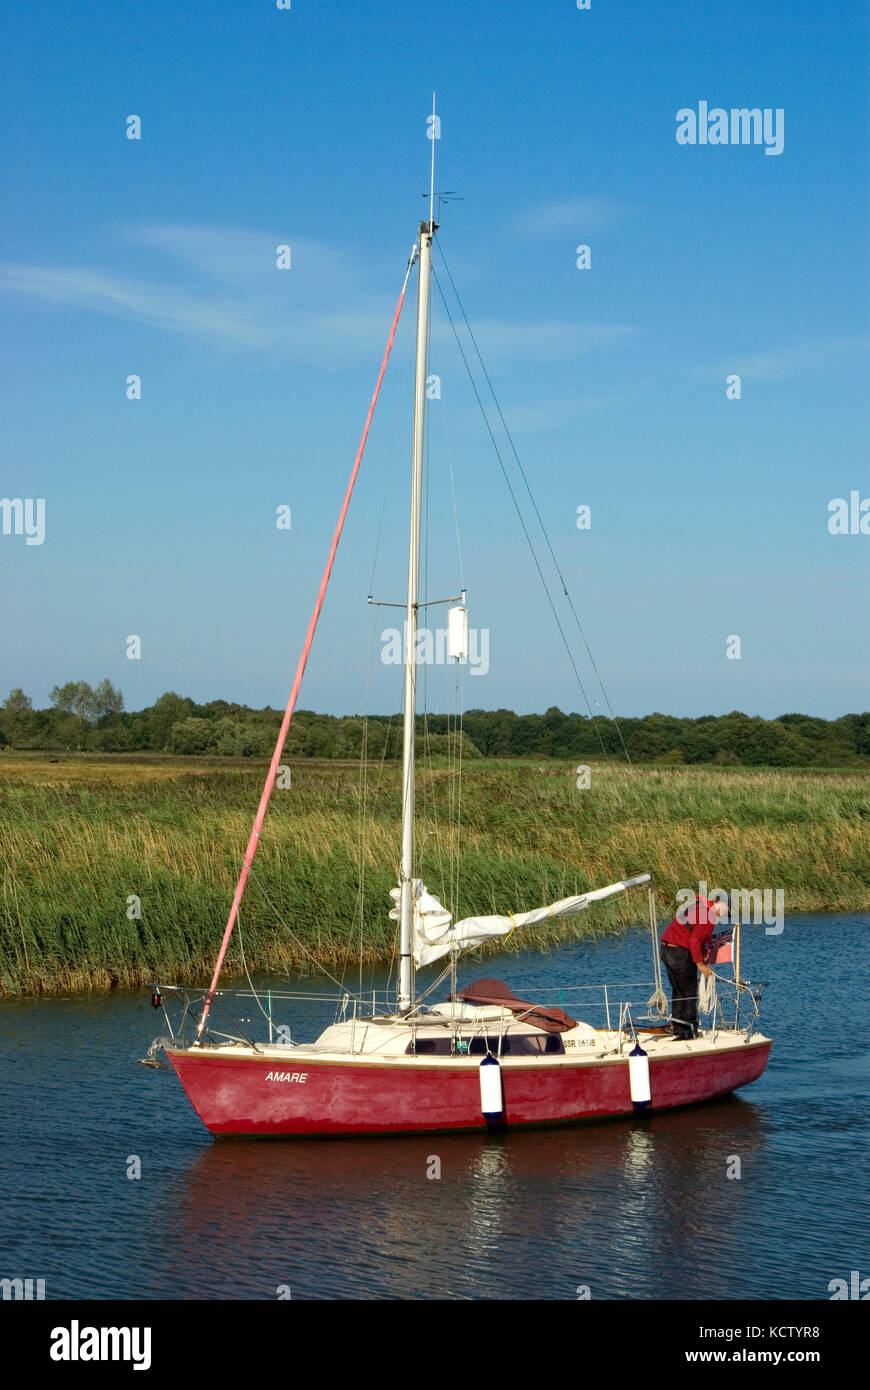 Sailing on the River Alde Stock Photo